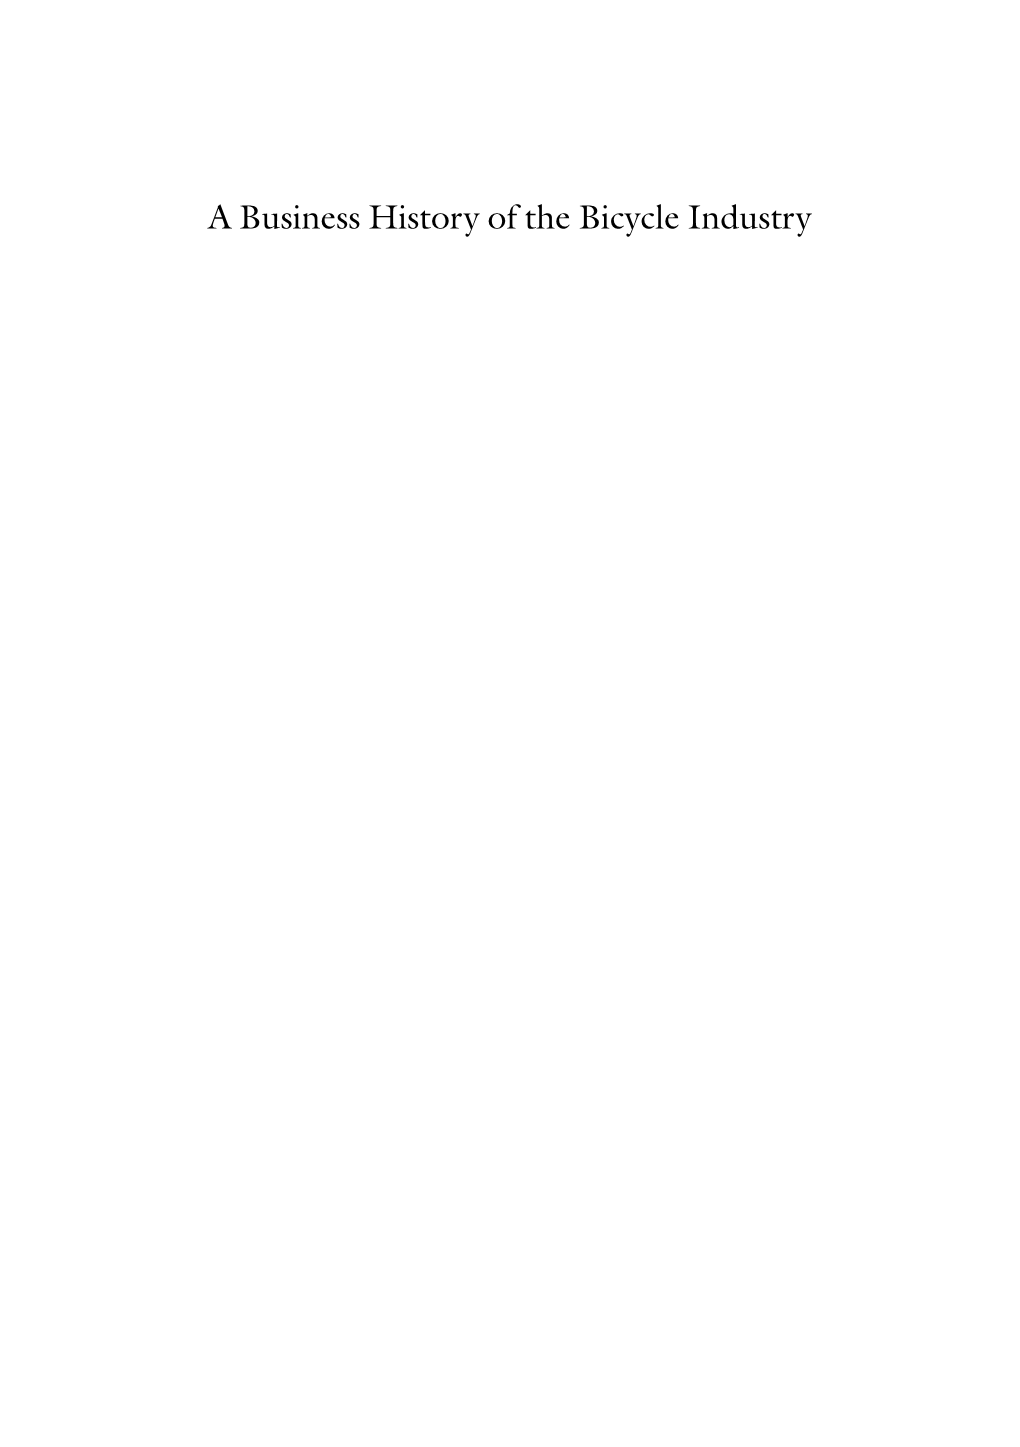 A Business History of the Bicycle Industry Carlo Mari a Business History of the Bicycle Industry